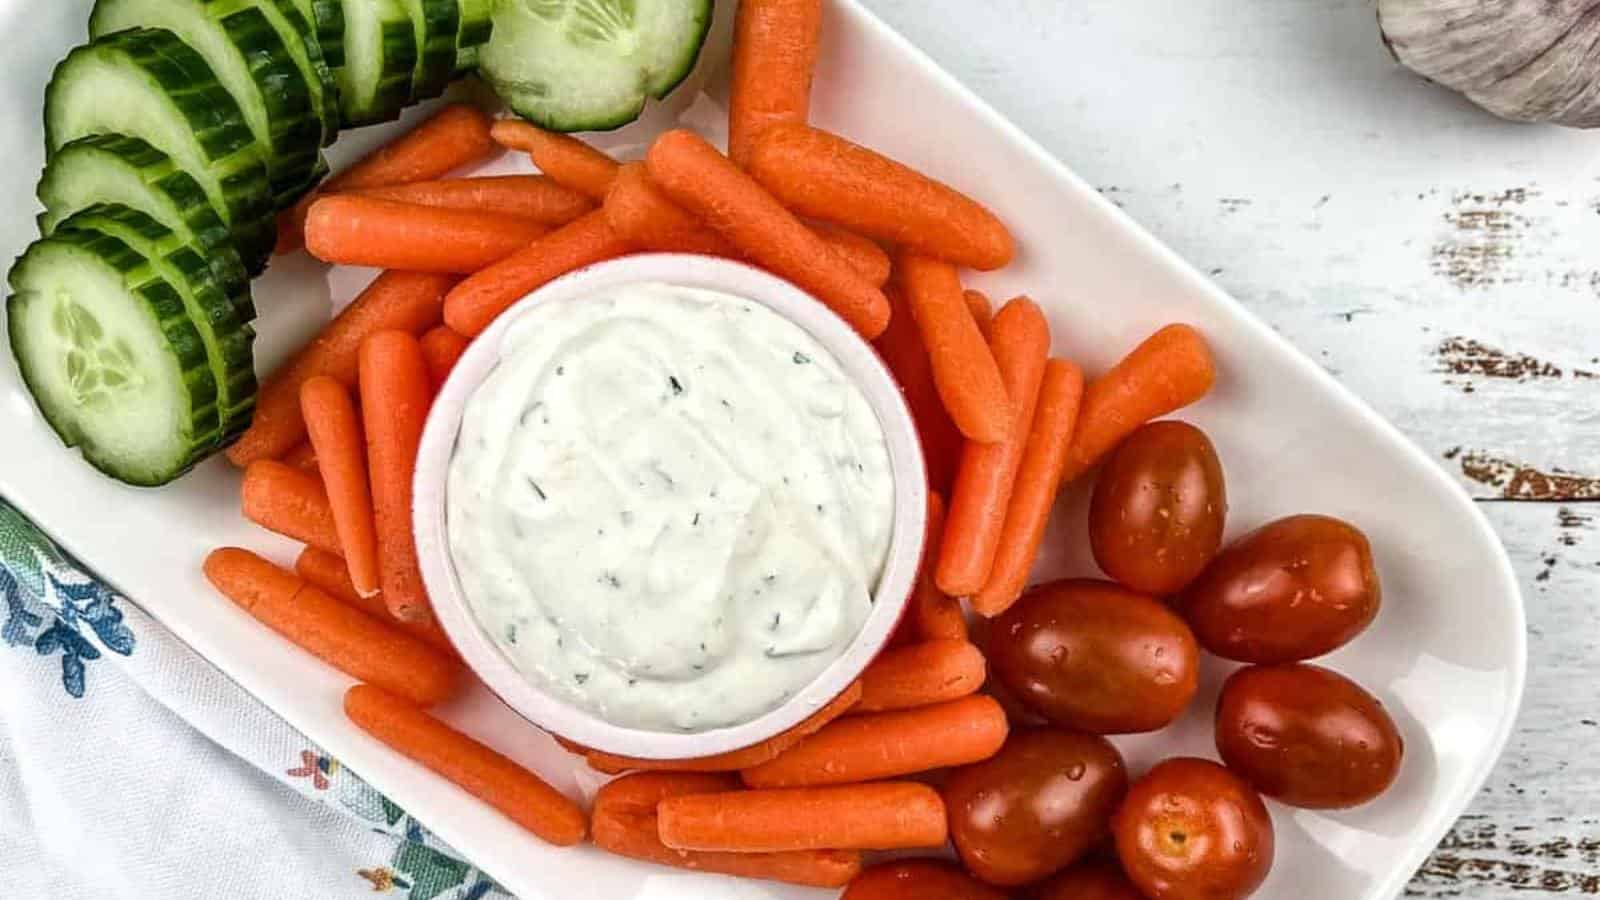 A plate with carrots, cucumbers and garlic dip.